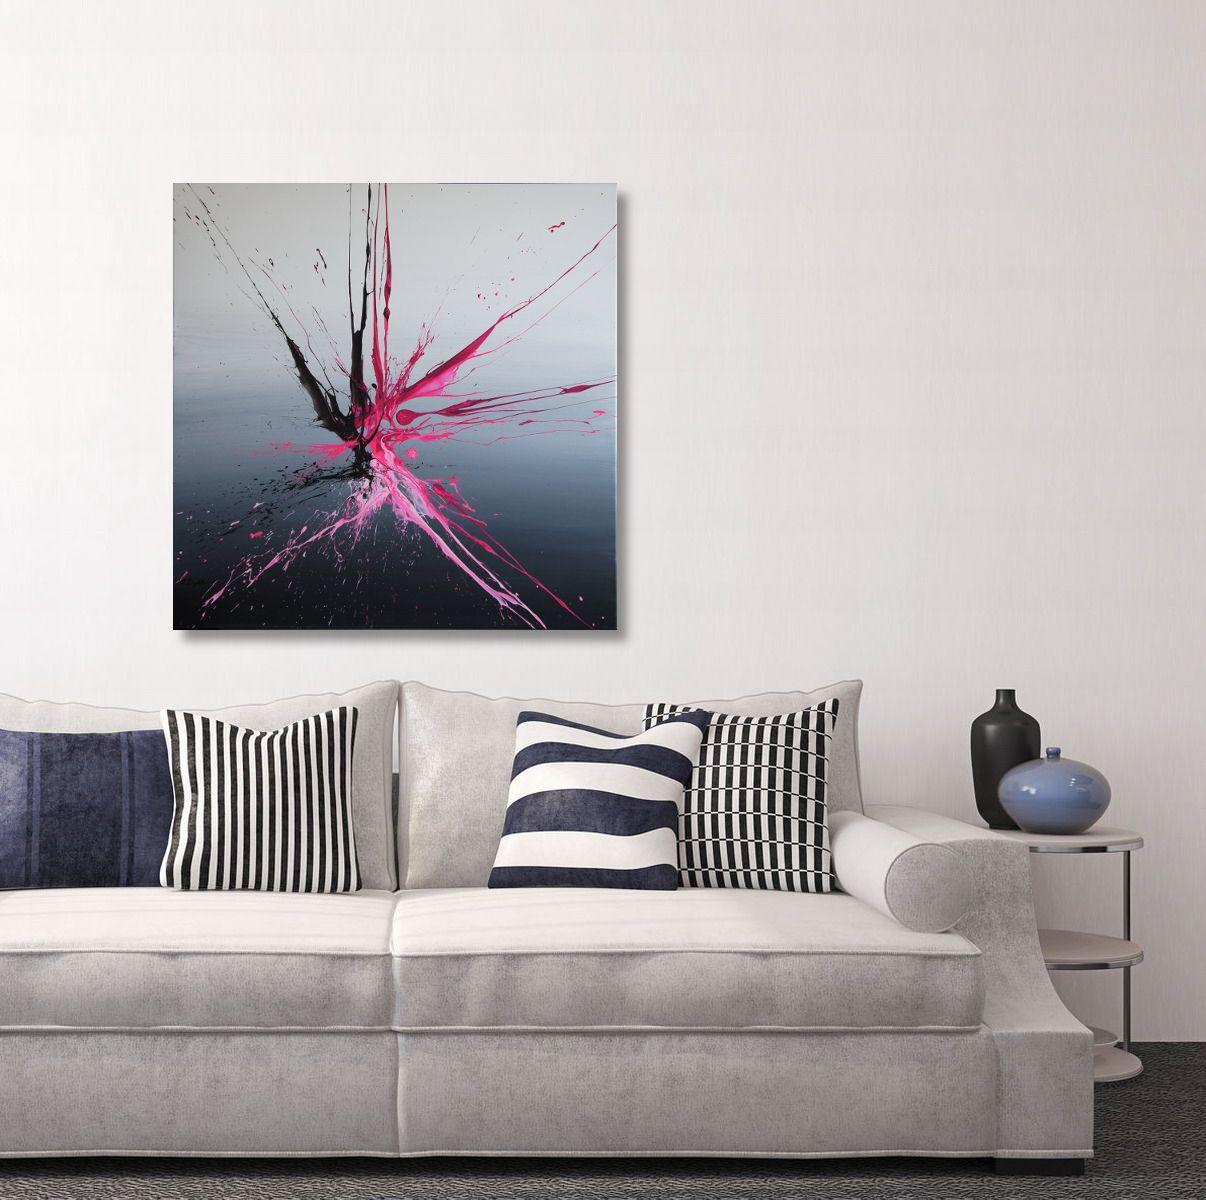 Hereâ€™s Number 25 of the striking Emotional Release series among the unique Spirits Of Skies collection. As Number 24, this one comes in an energetic combination of all shades from (neon) pink to magenta with black against a distant appearing